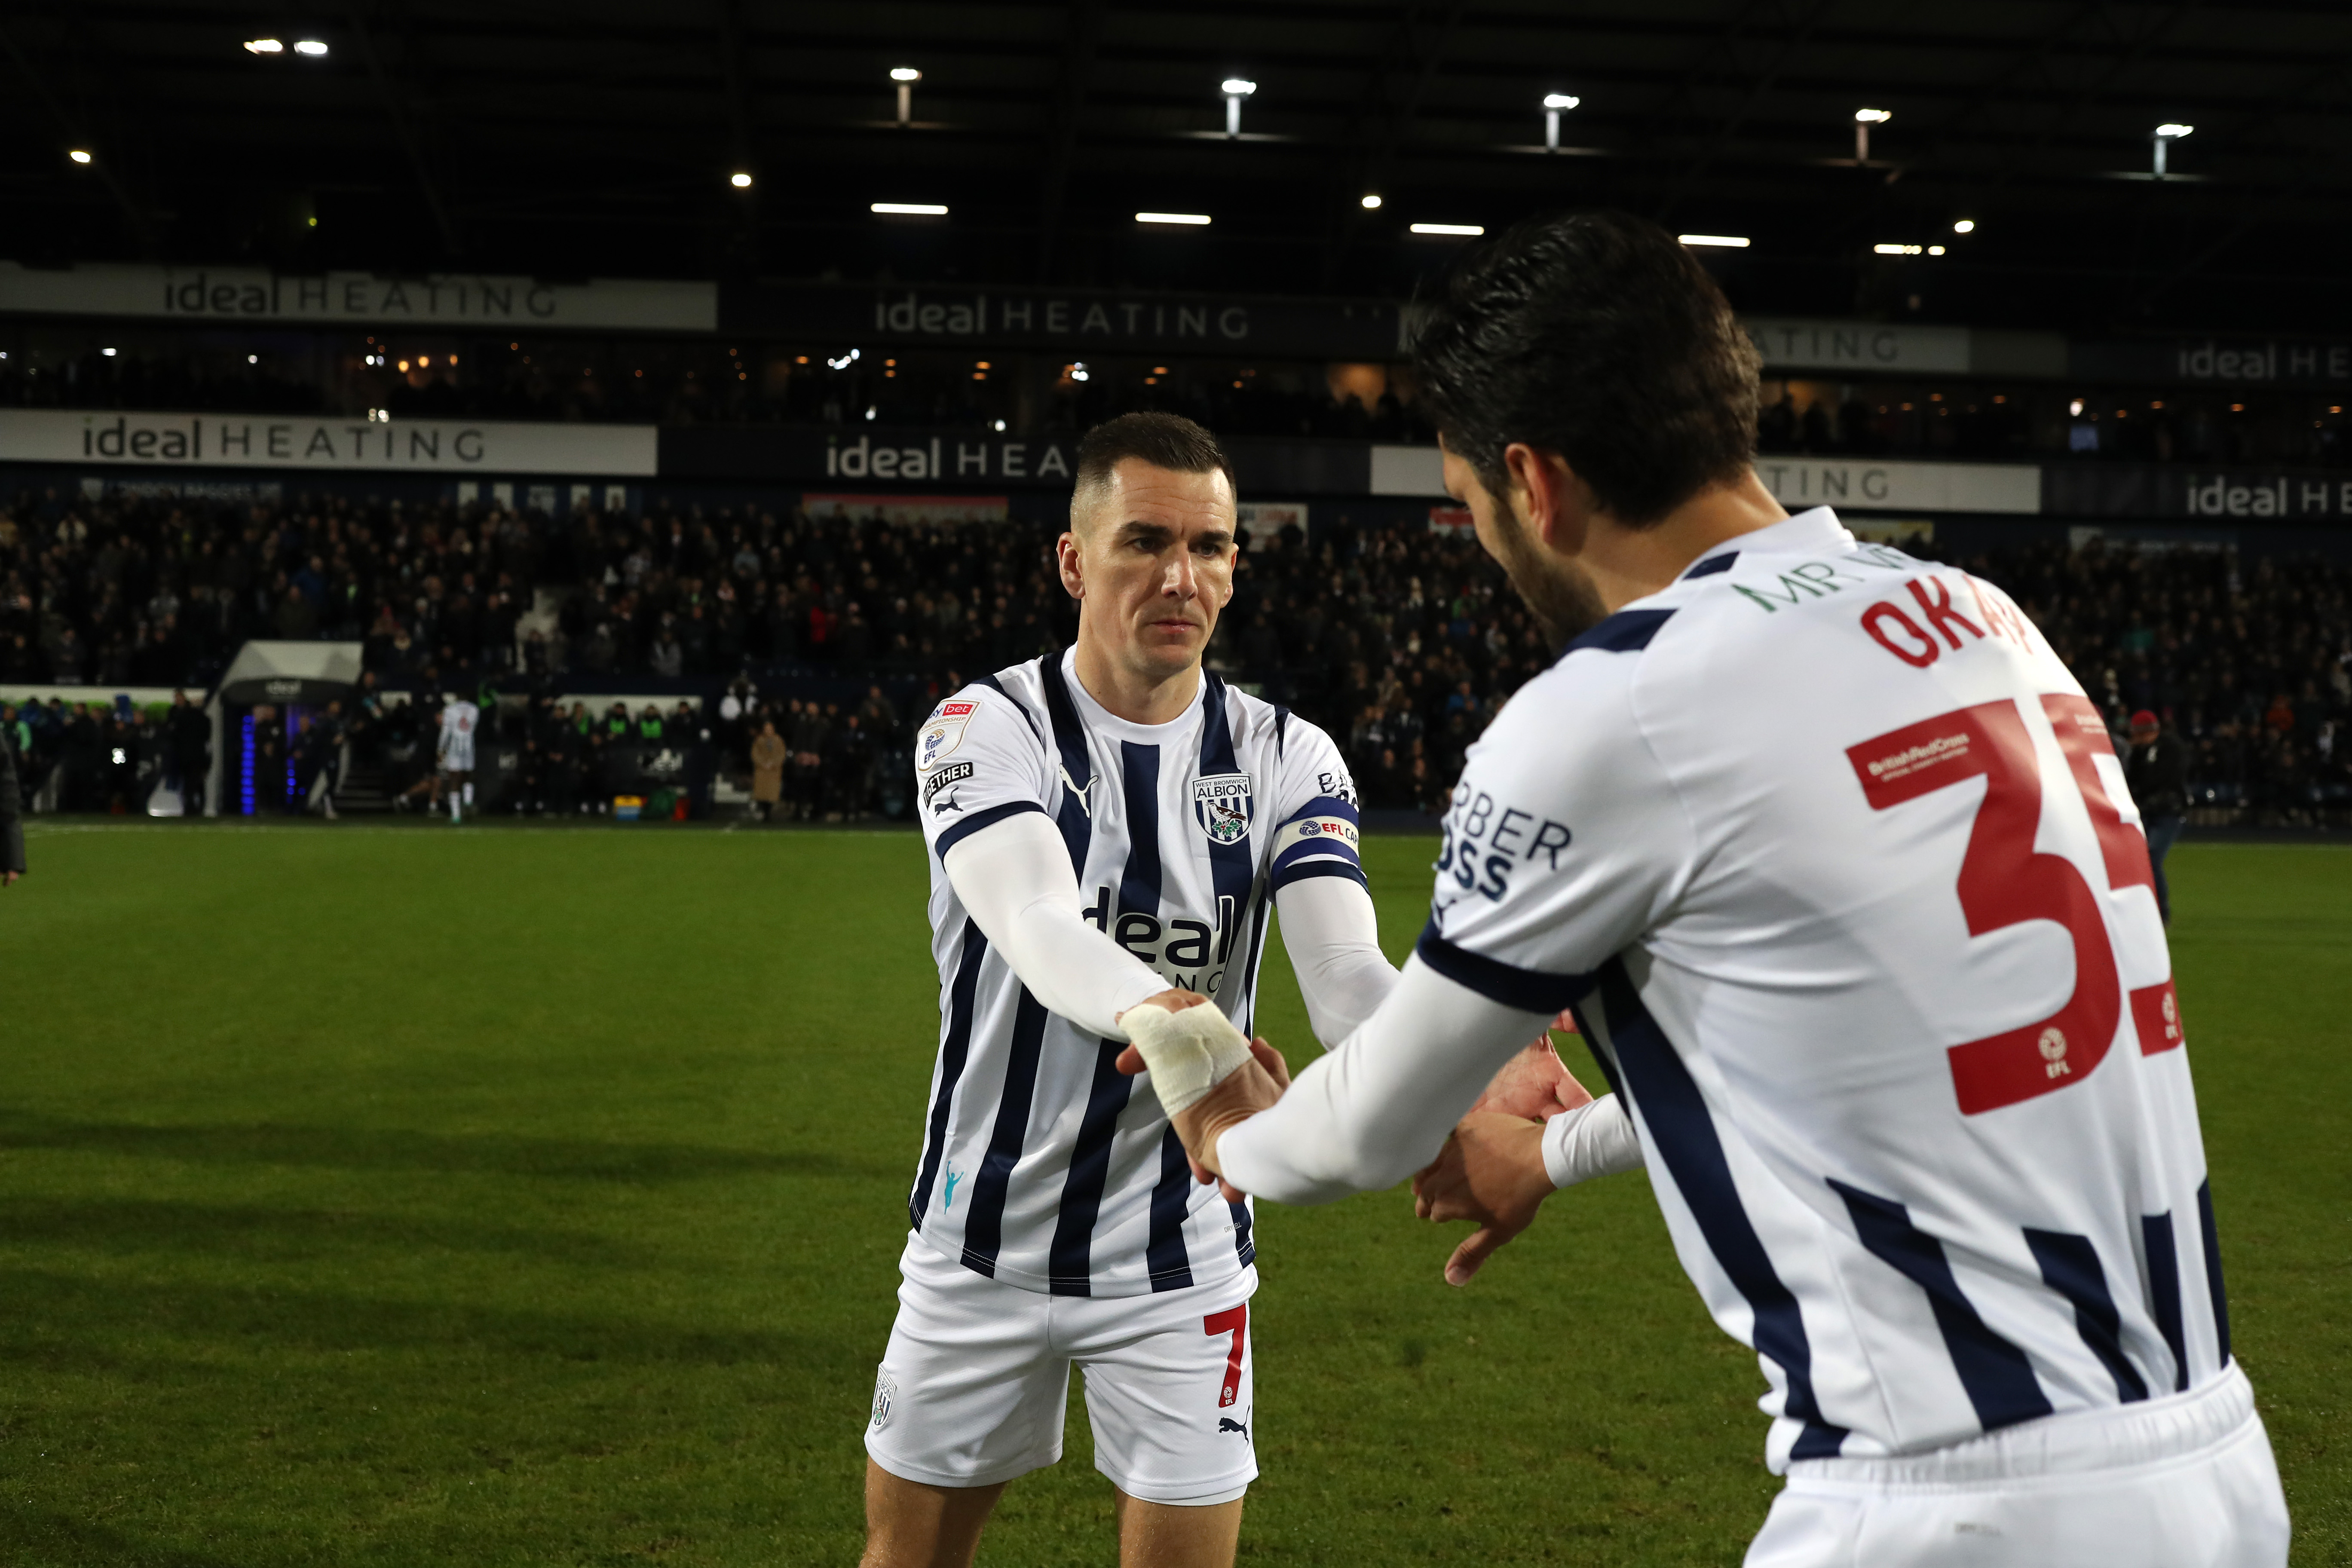 Jed Wallace and Okay Yokuslu slap hands before a game at The Hawthorns both wearing home kits